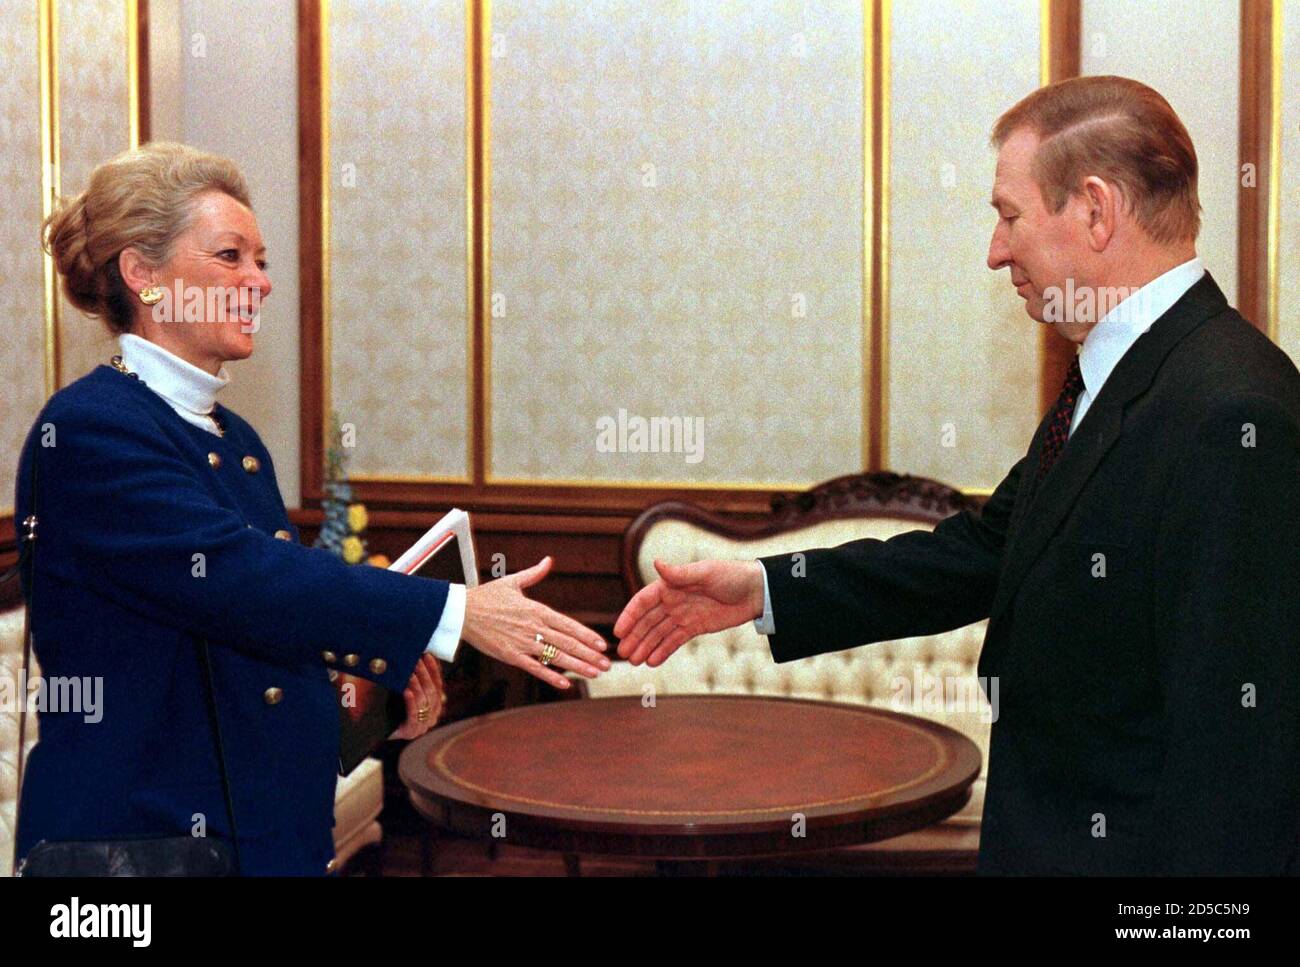 Ukraine's President Leonid Kuchma (R) greets the chairman of Organisation for Security and Cooperation In Europe (OSCE) Helle Deign before their talks February 23. Deign arrived in Kiev for a two day visit to discuss relations between Ukraine and the OSCE.  YK/CVI/ME Stock Photo